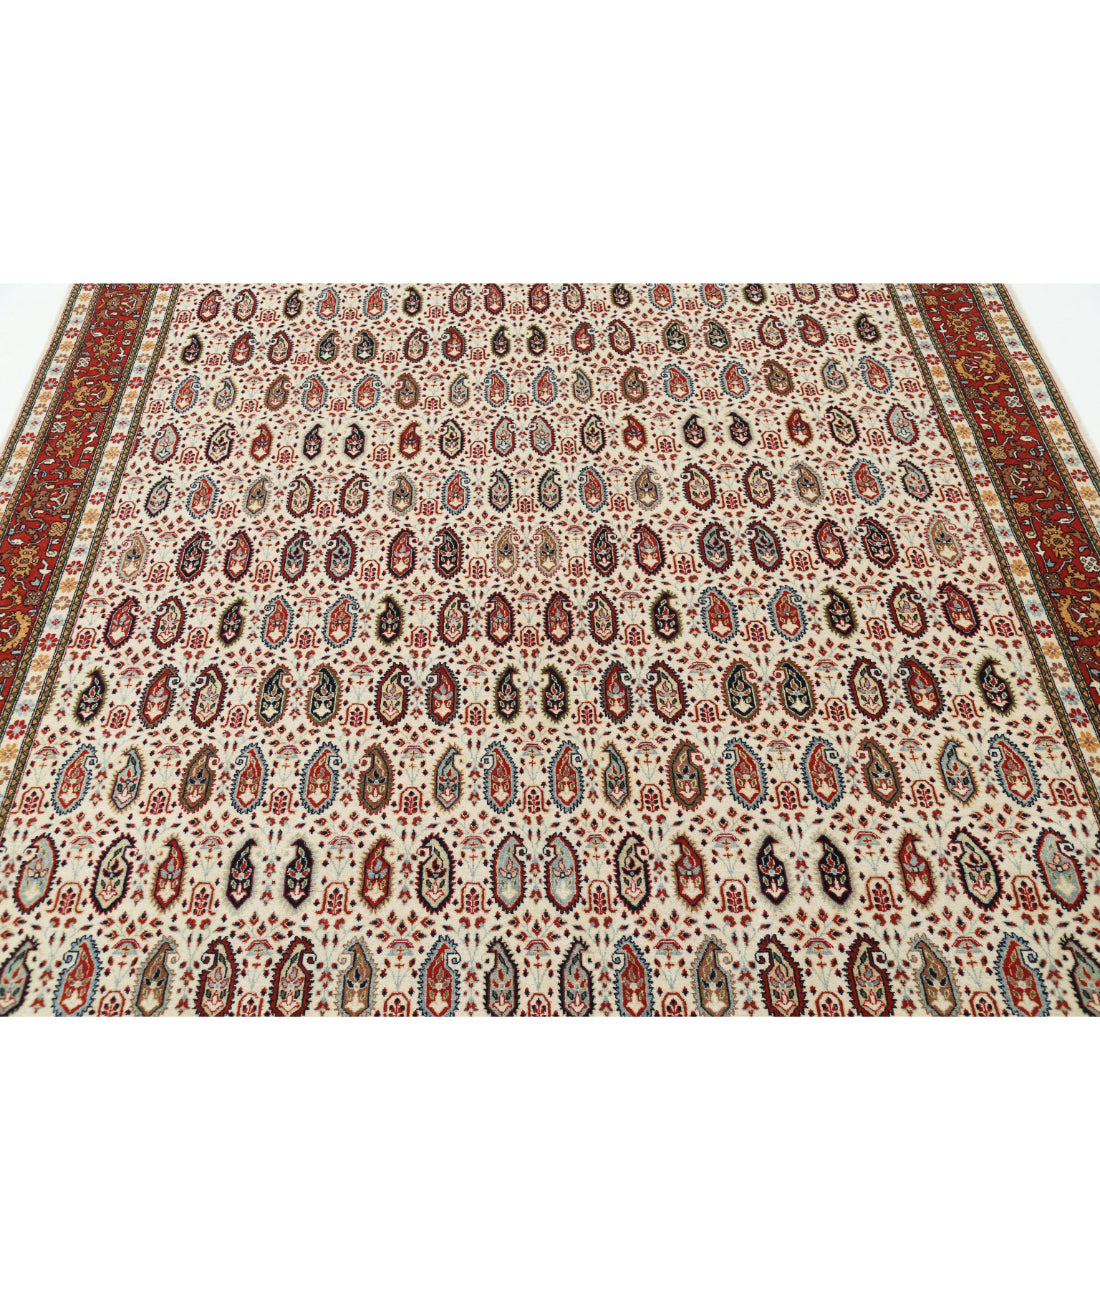 Hand Knotted Persian Tabriz Wool Rug - 6'5'' x 9'5'' 6'5'' x 9'5'' (193 X 283) / Ivory / Red